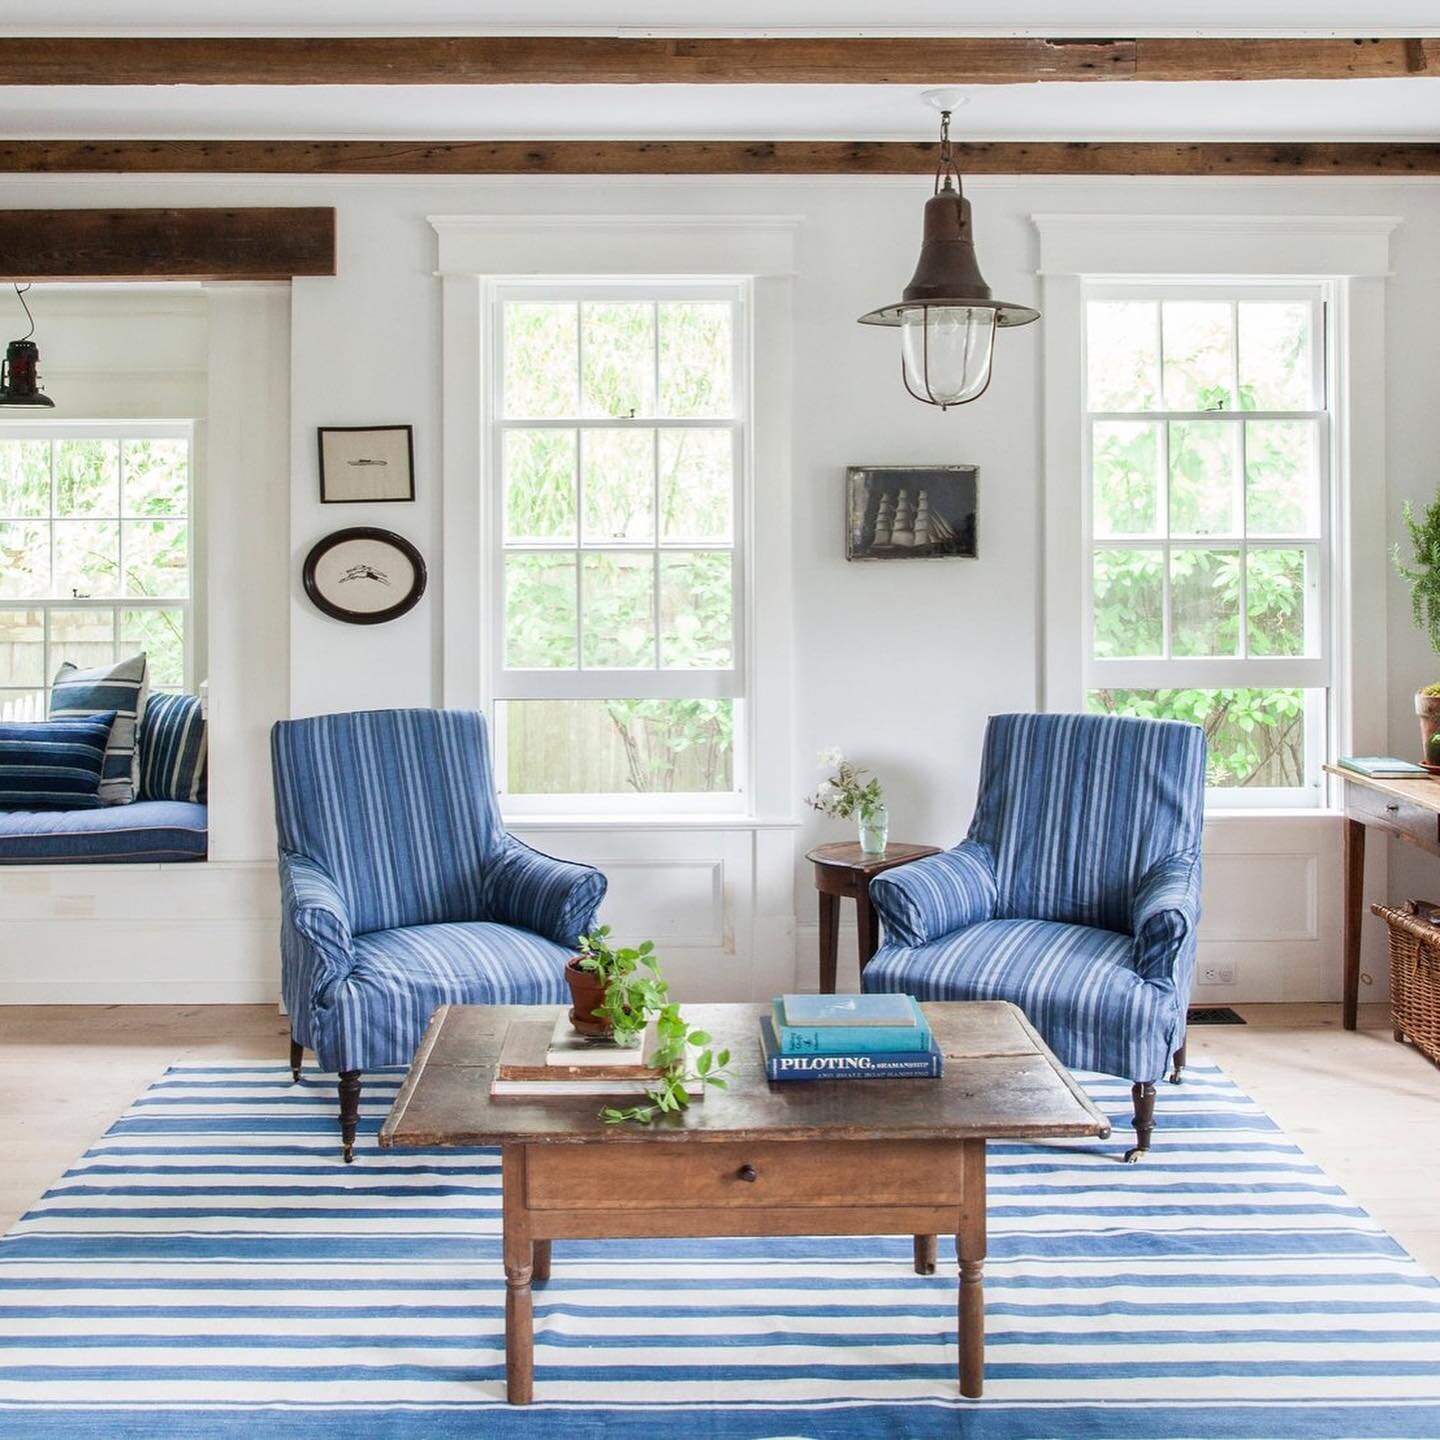 Taking a cue from Sag Harbor&rsquo;s past as a fisherman&rsquo;s village, interior designer @elizabethcooperinteriordesign and homeowners @blythe.harris and her husband Mark added classic coastal elements such as nautical-themed antiques, cotton dhur